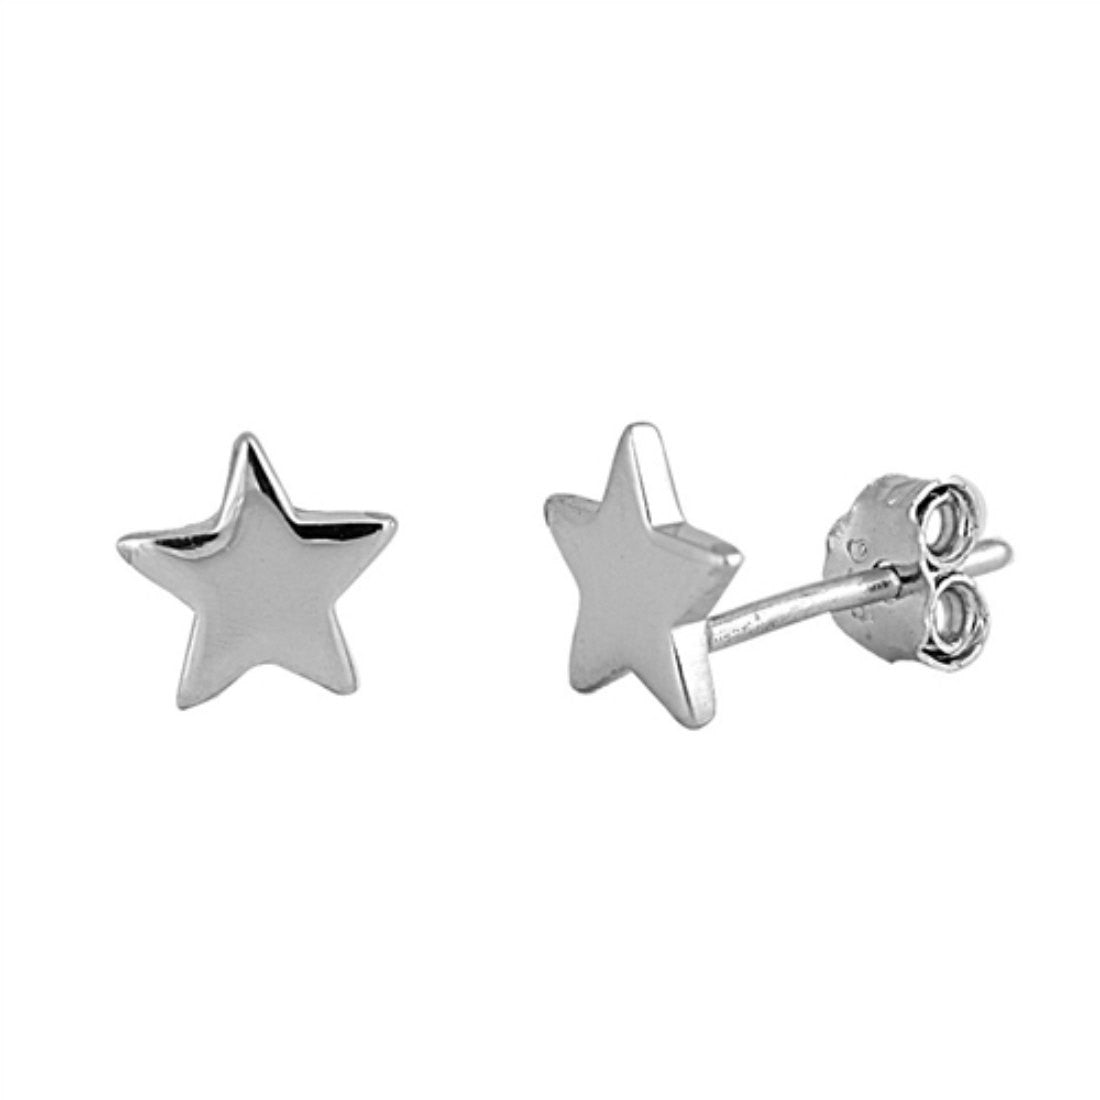 7mm Cute Small Tiny Star Shape Stud Post Earrings Solid 925 Sterling Silver Star Earrings Gift For Children Kids Star  Jewelry - Blue Apple Jewelry